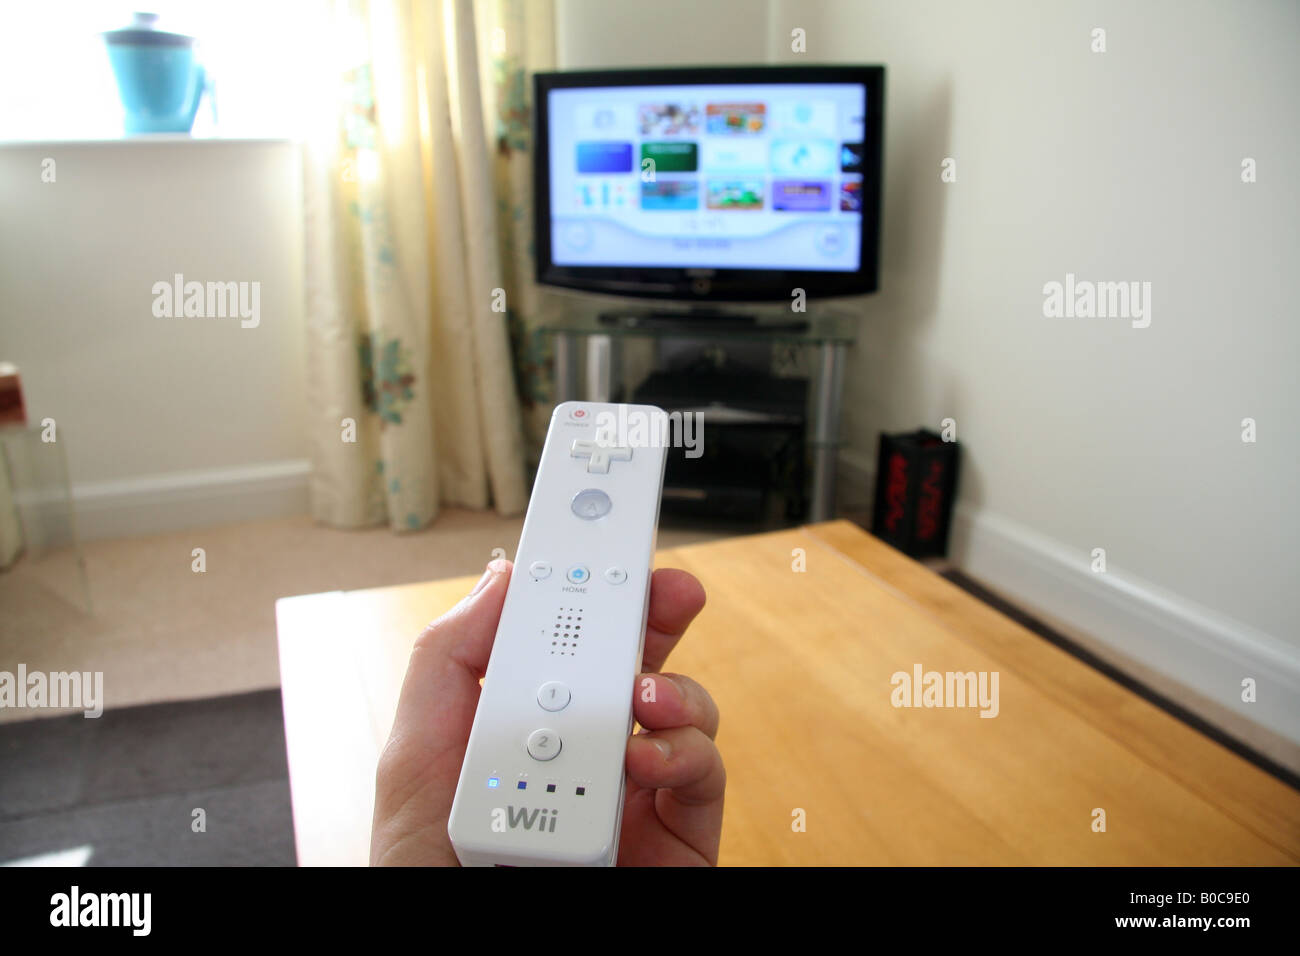 Hand Holding Nintendo wii controller pointing at the TV Stock Photo - Alamy